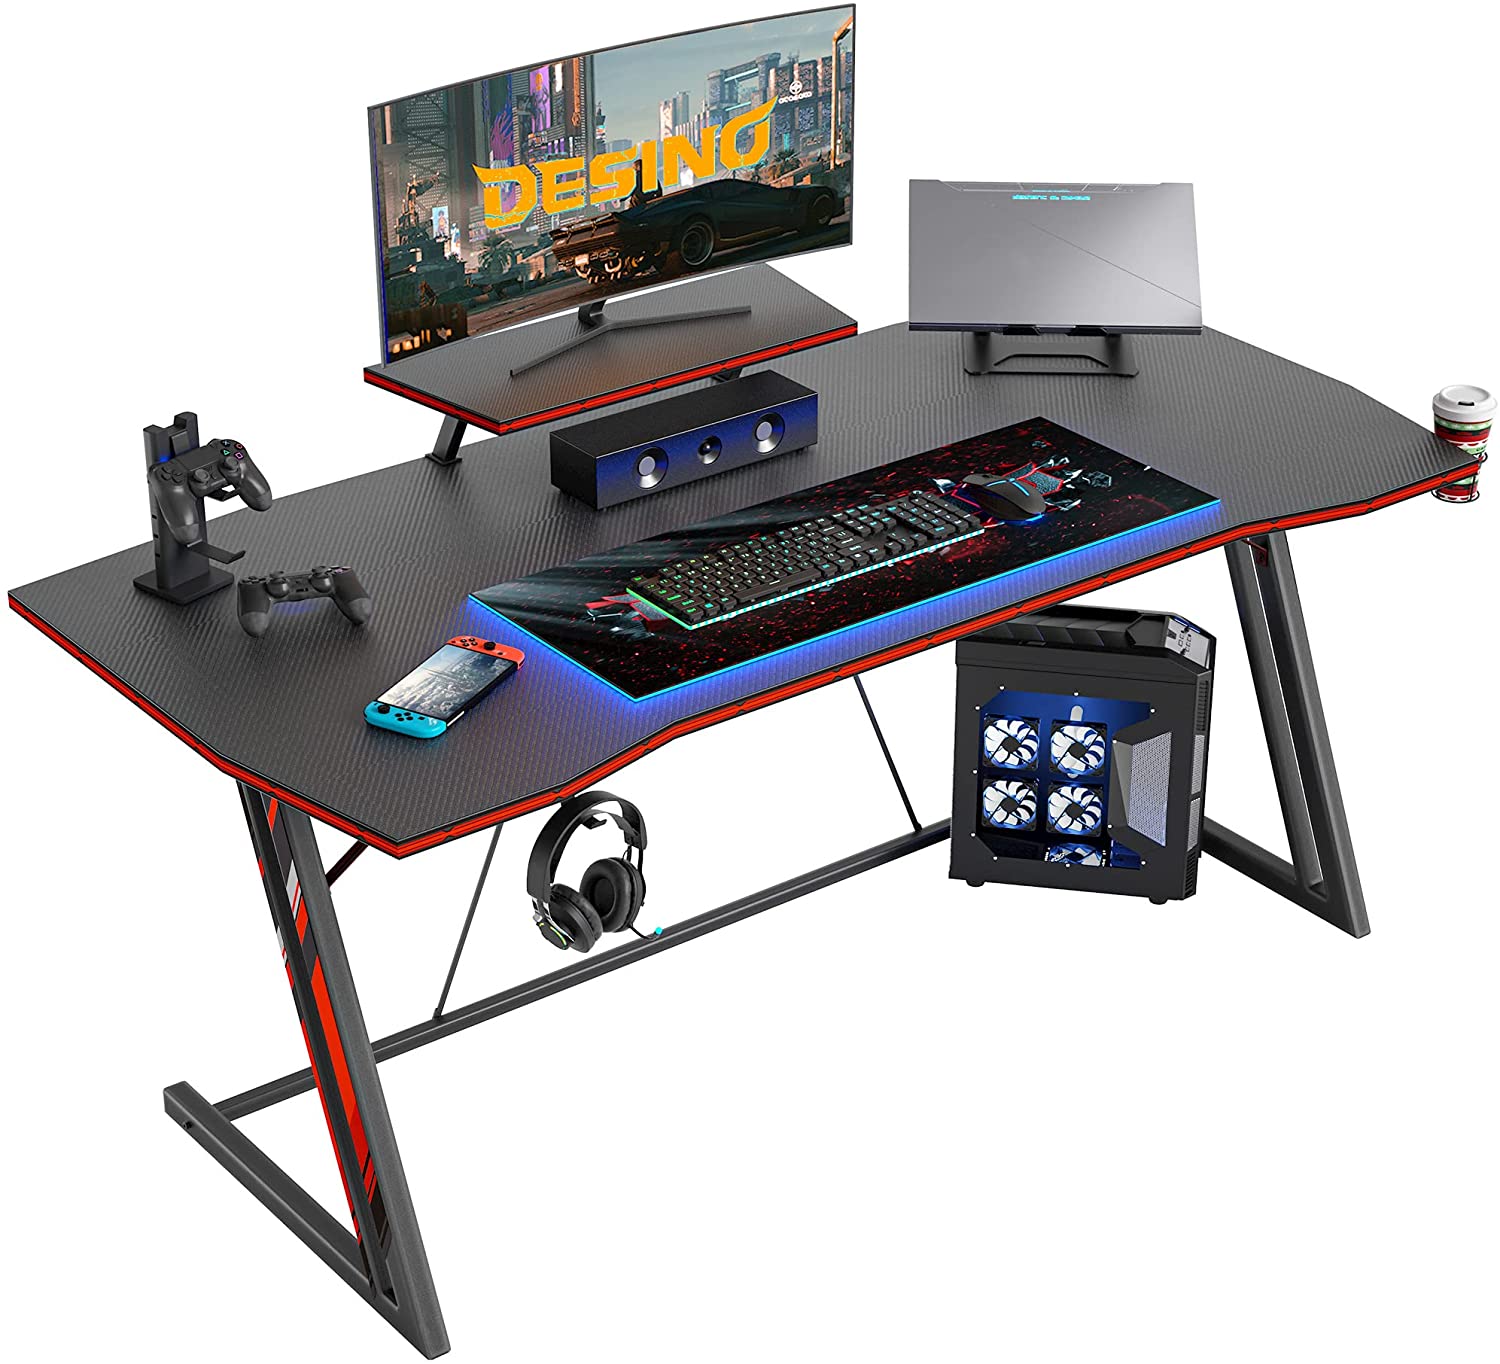 DESINO Gaming Desk 40 inch PC Computer Desk, Home Office Desk Gaming Table Z Shaped Gamer Workstation with Cup Holder and Headphone Hook, Black